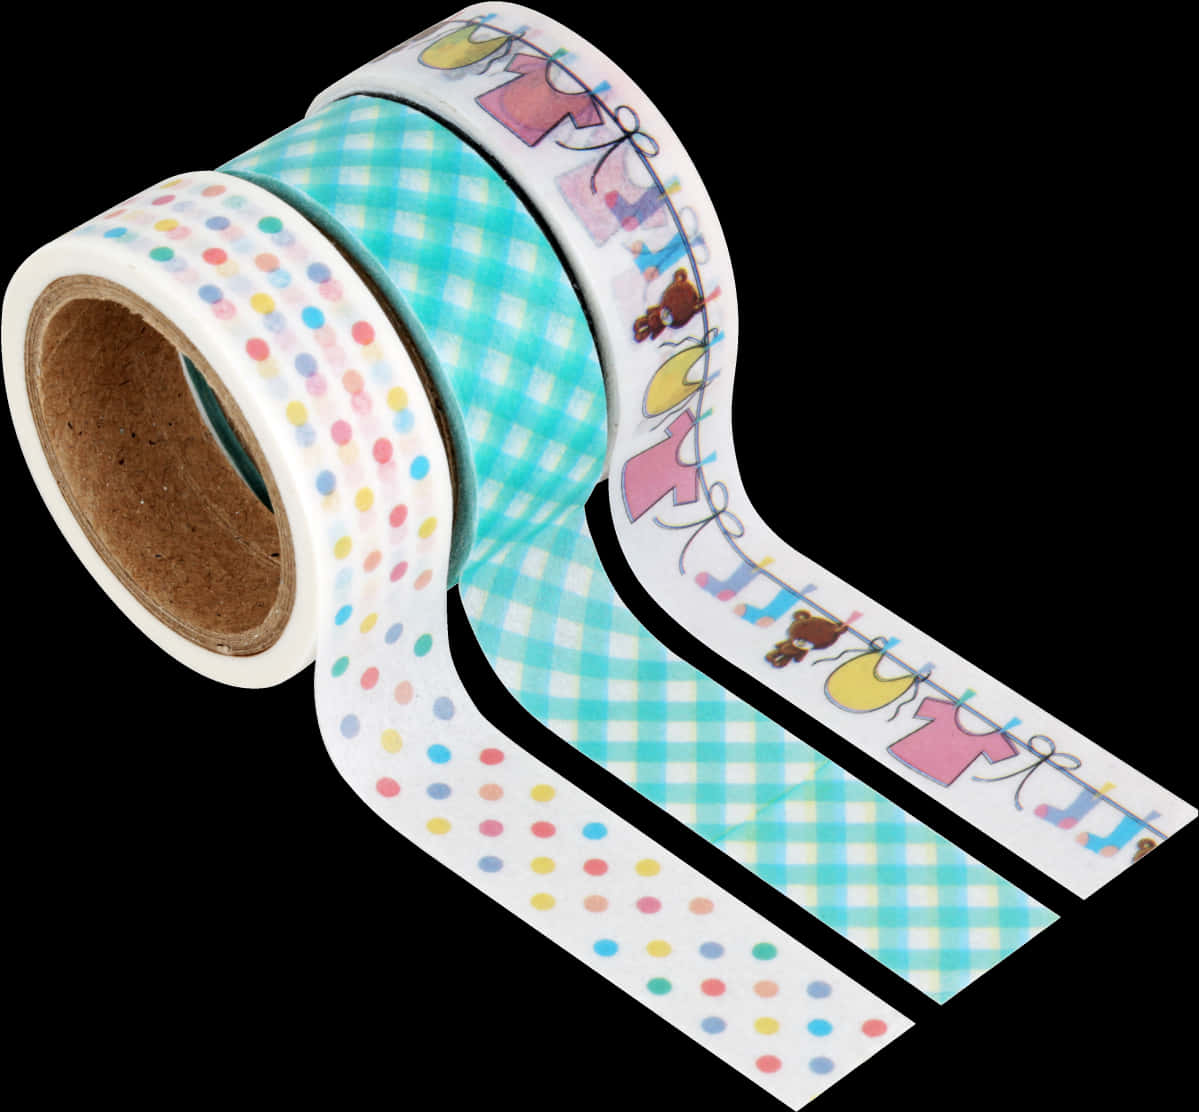 A Roll Of Tape With Different Designs